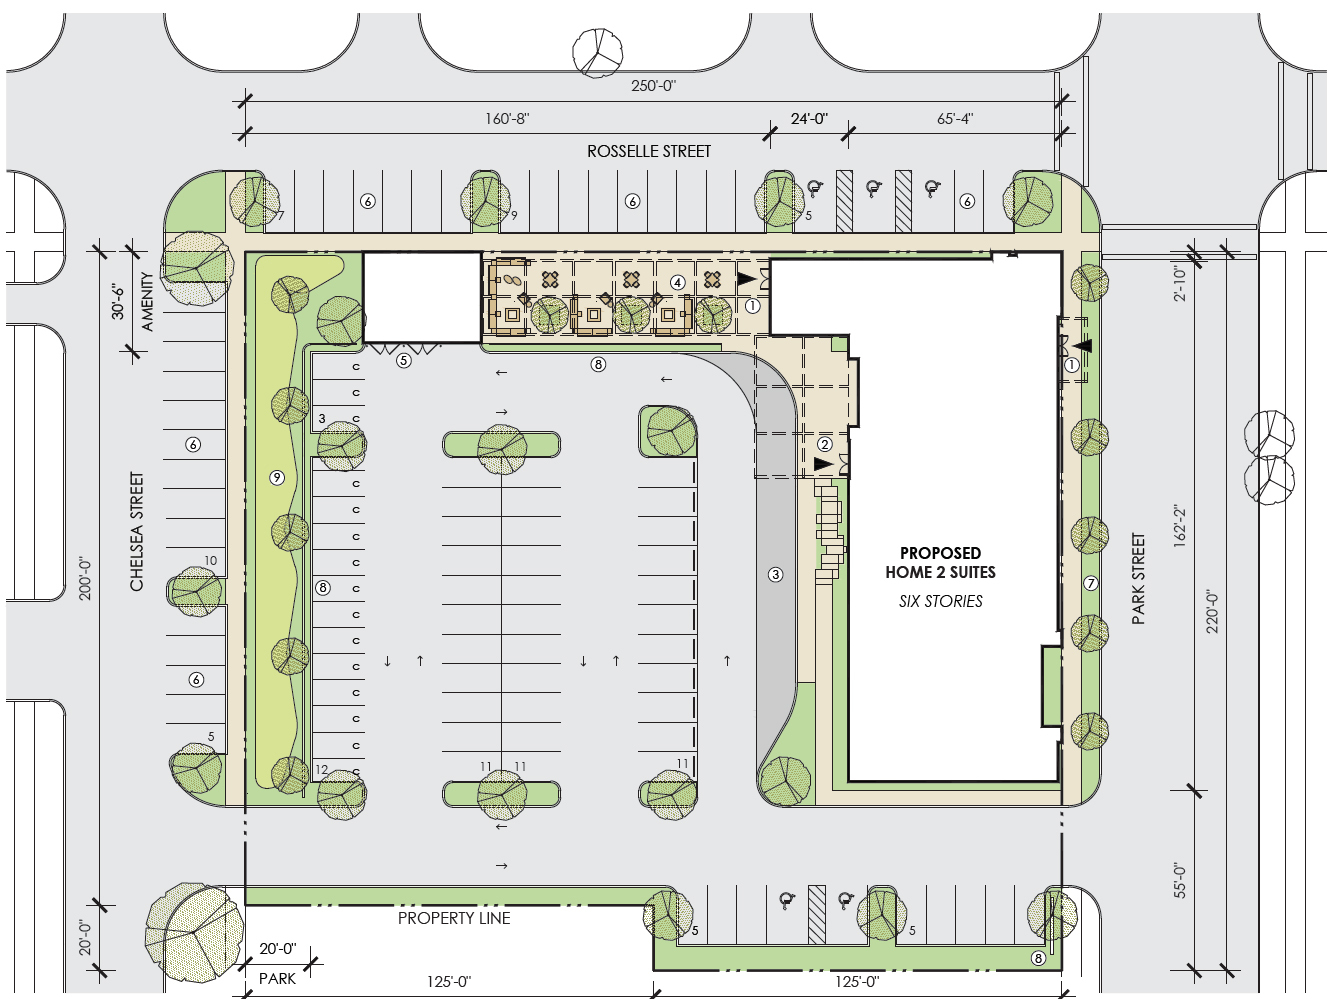 The site plan for the Home2 Suites by Hilton project.